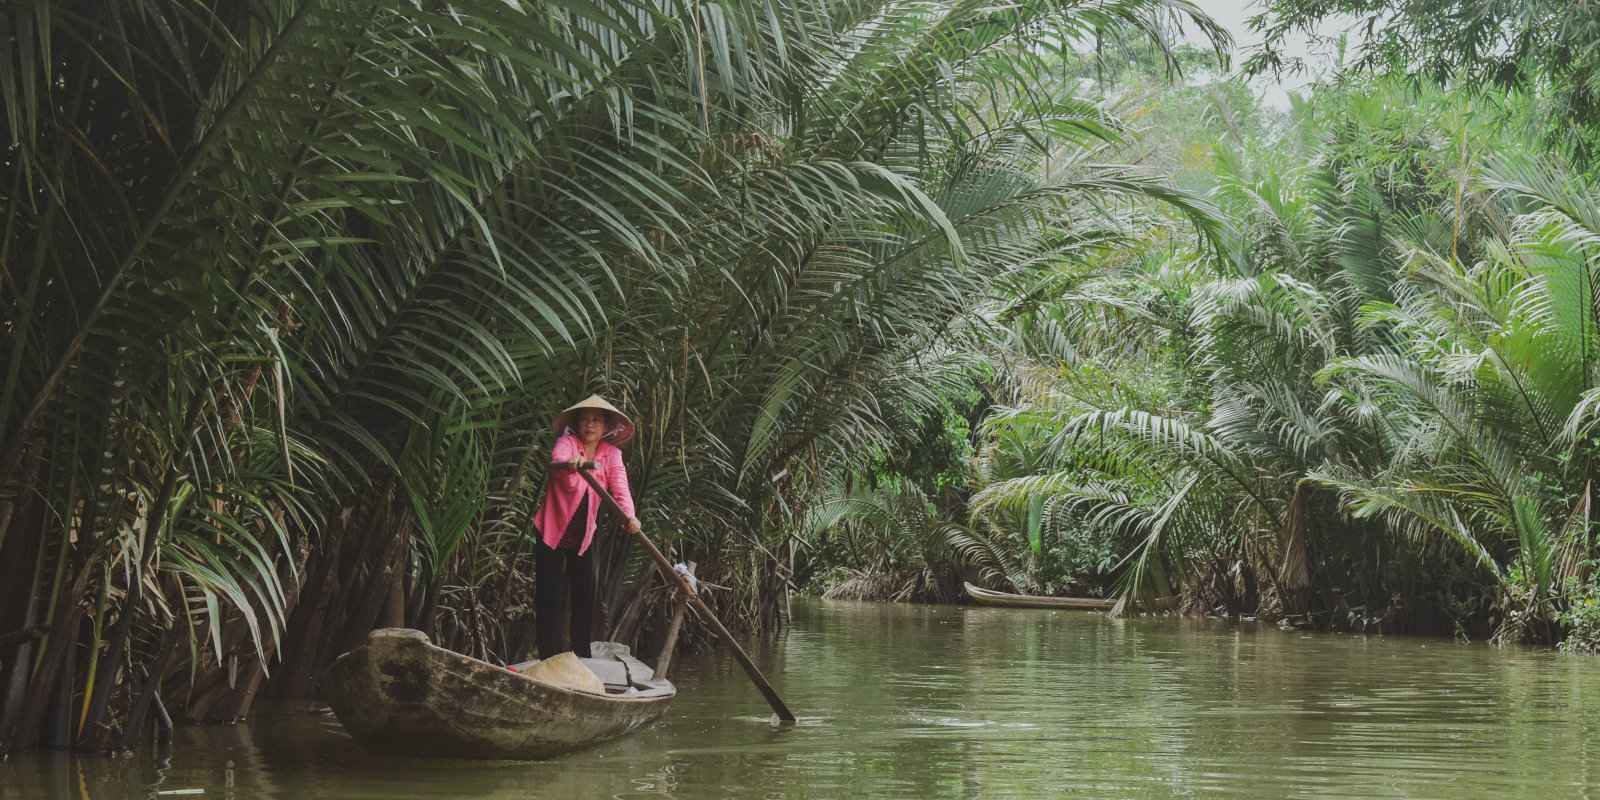 You'll spot locals punting down the River Mekong on this luxury gay river cruise